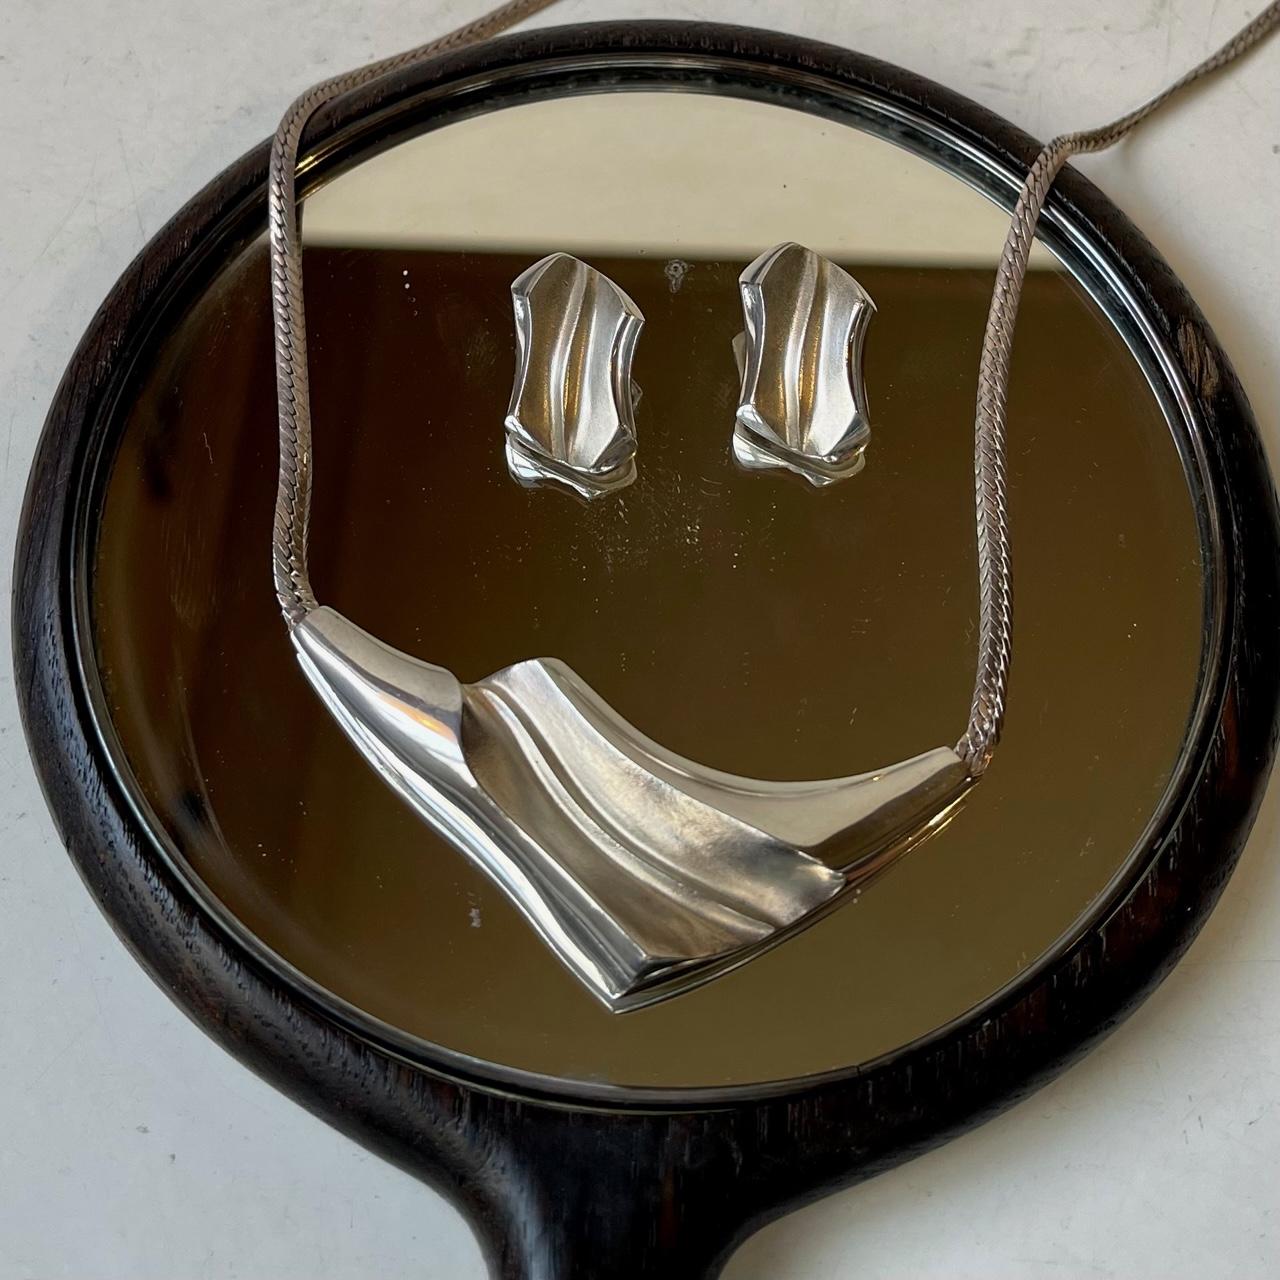 A late 1960s or early 1970s pendant necklace with matching earrings/ear-clips by Danish silversmith N. E. From. The set exhibits a delicate texture/polish to its abstract shapes. The pendant comes with its original 40 cm integrated Bismarck necklace